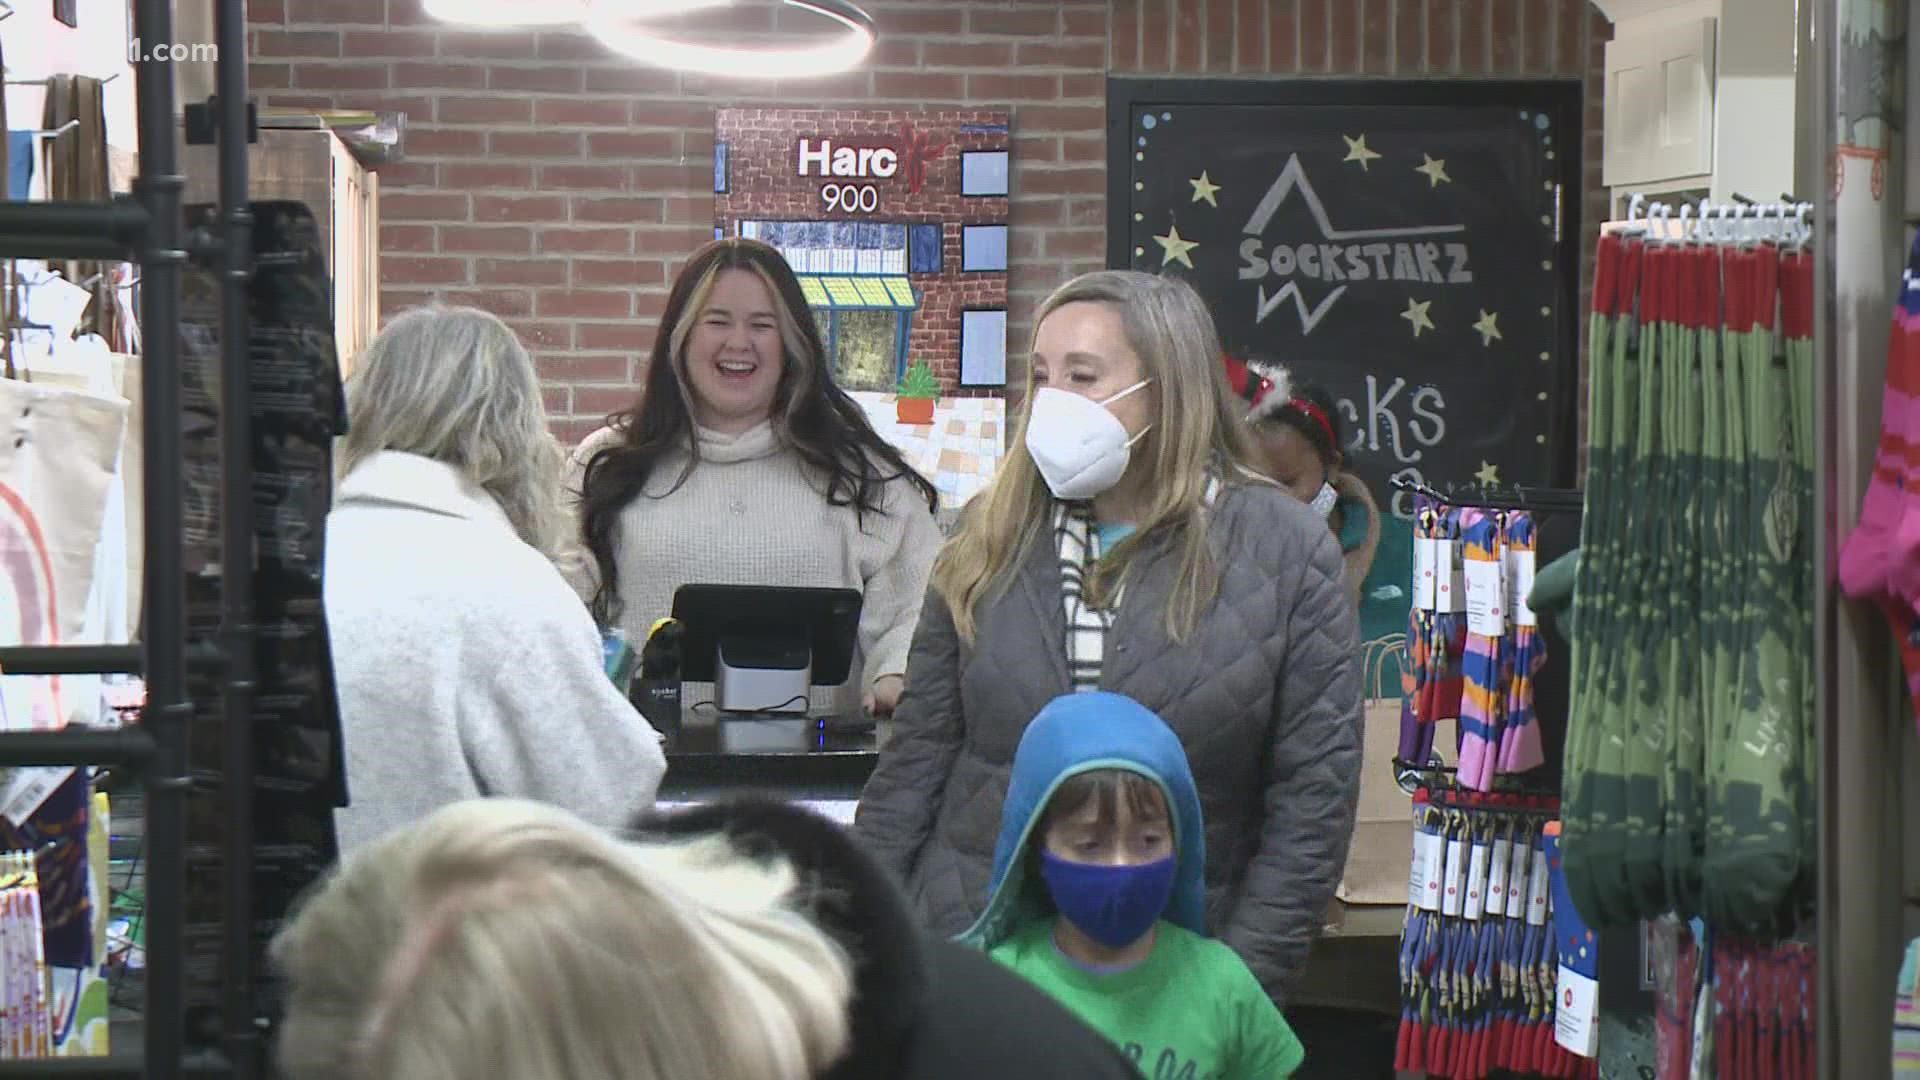 With Christmas only two days away, Downtown West Hartford was filled with crowds looking to purchase last-minute gifts.